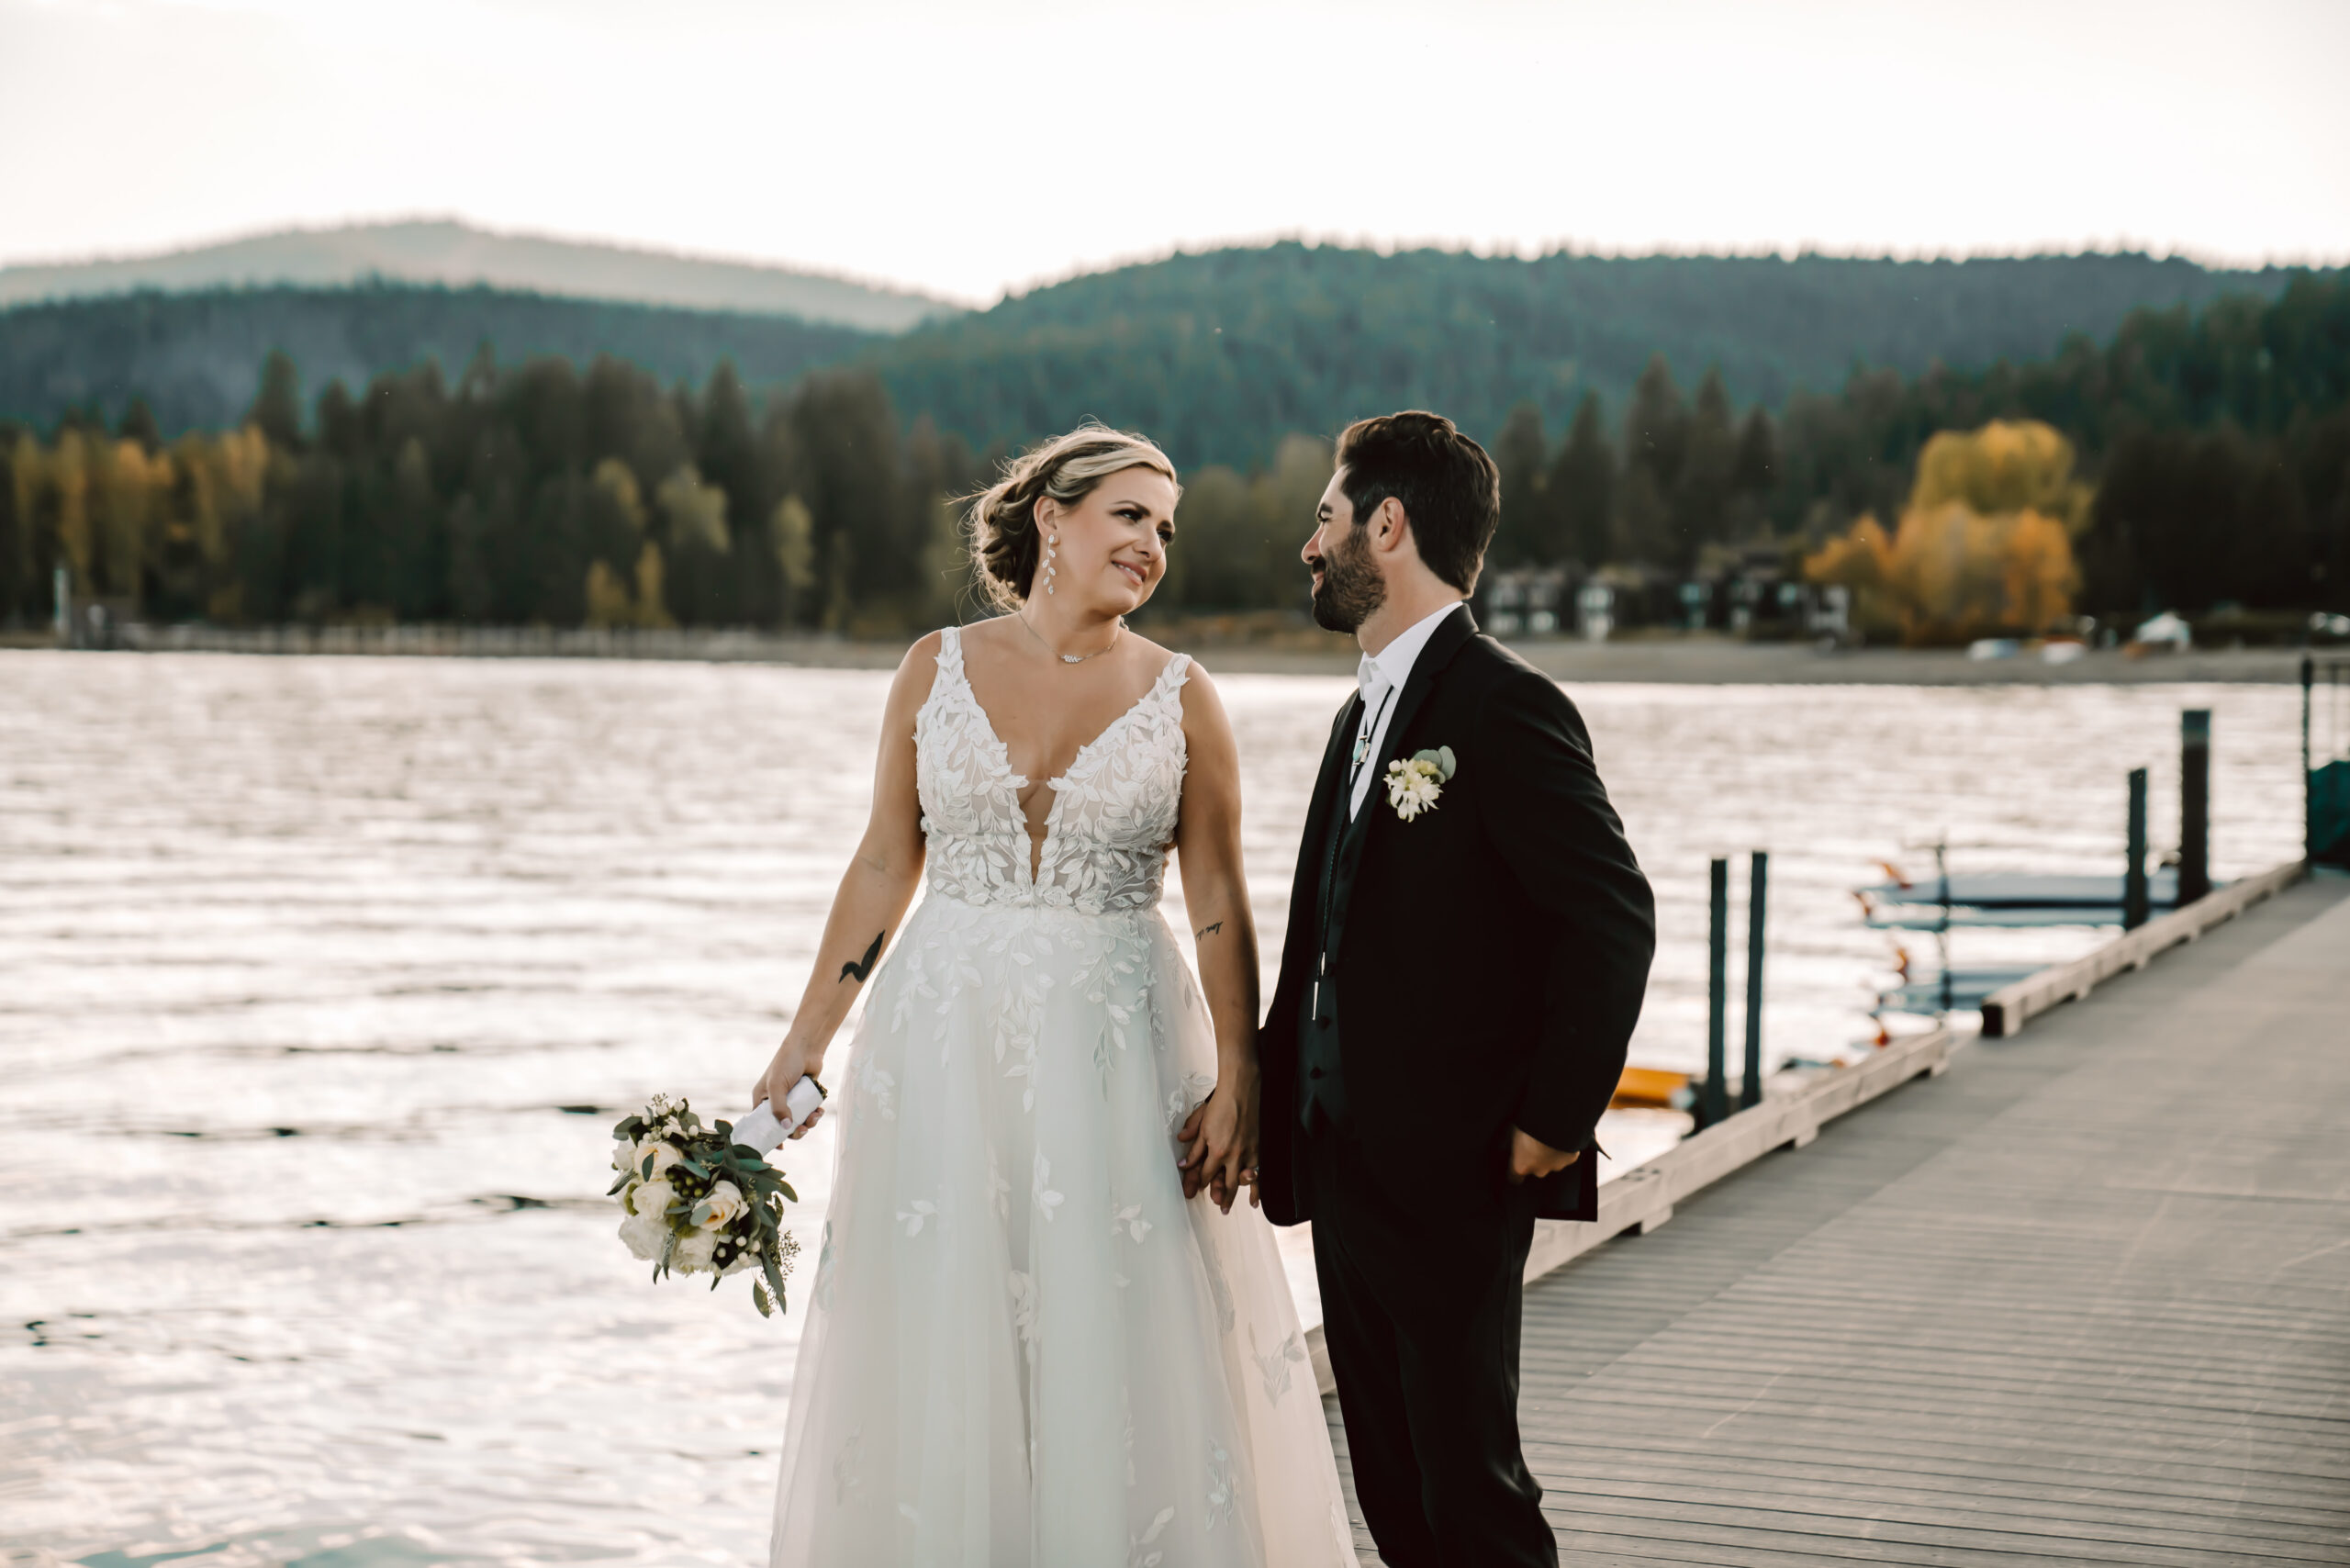 A bride and groom walking on a dock in Lake Tahoe during their wedding day with mountains in the backdrop